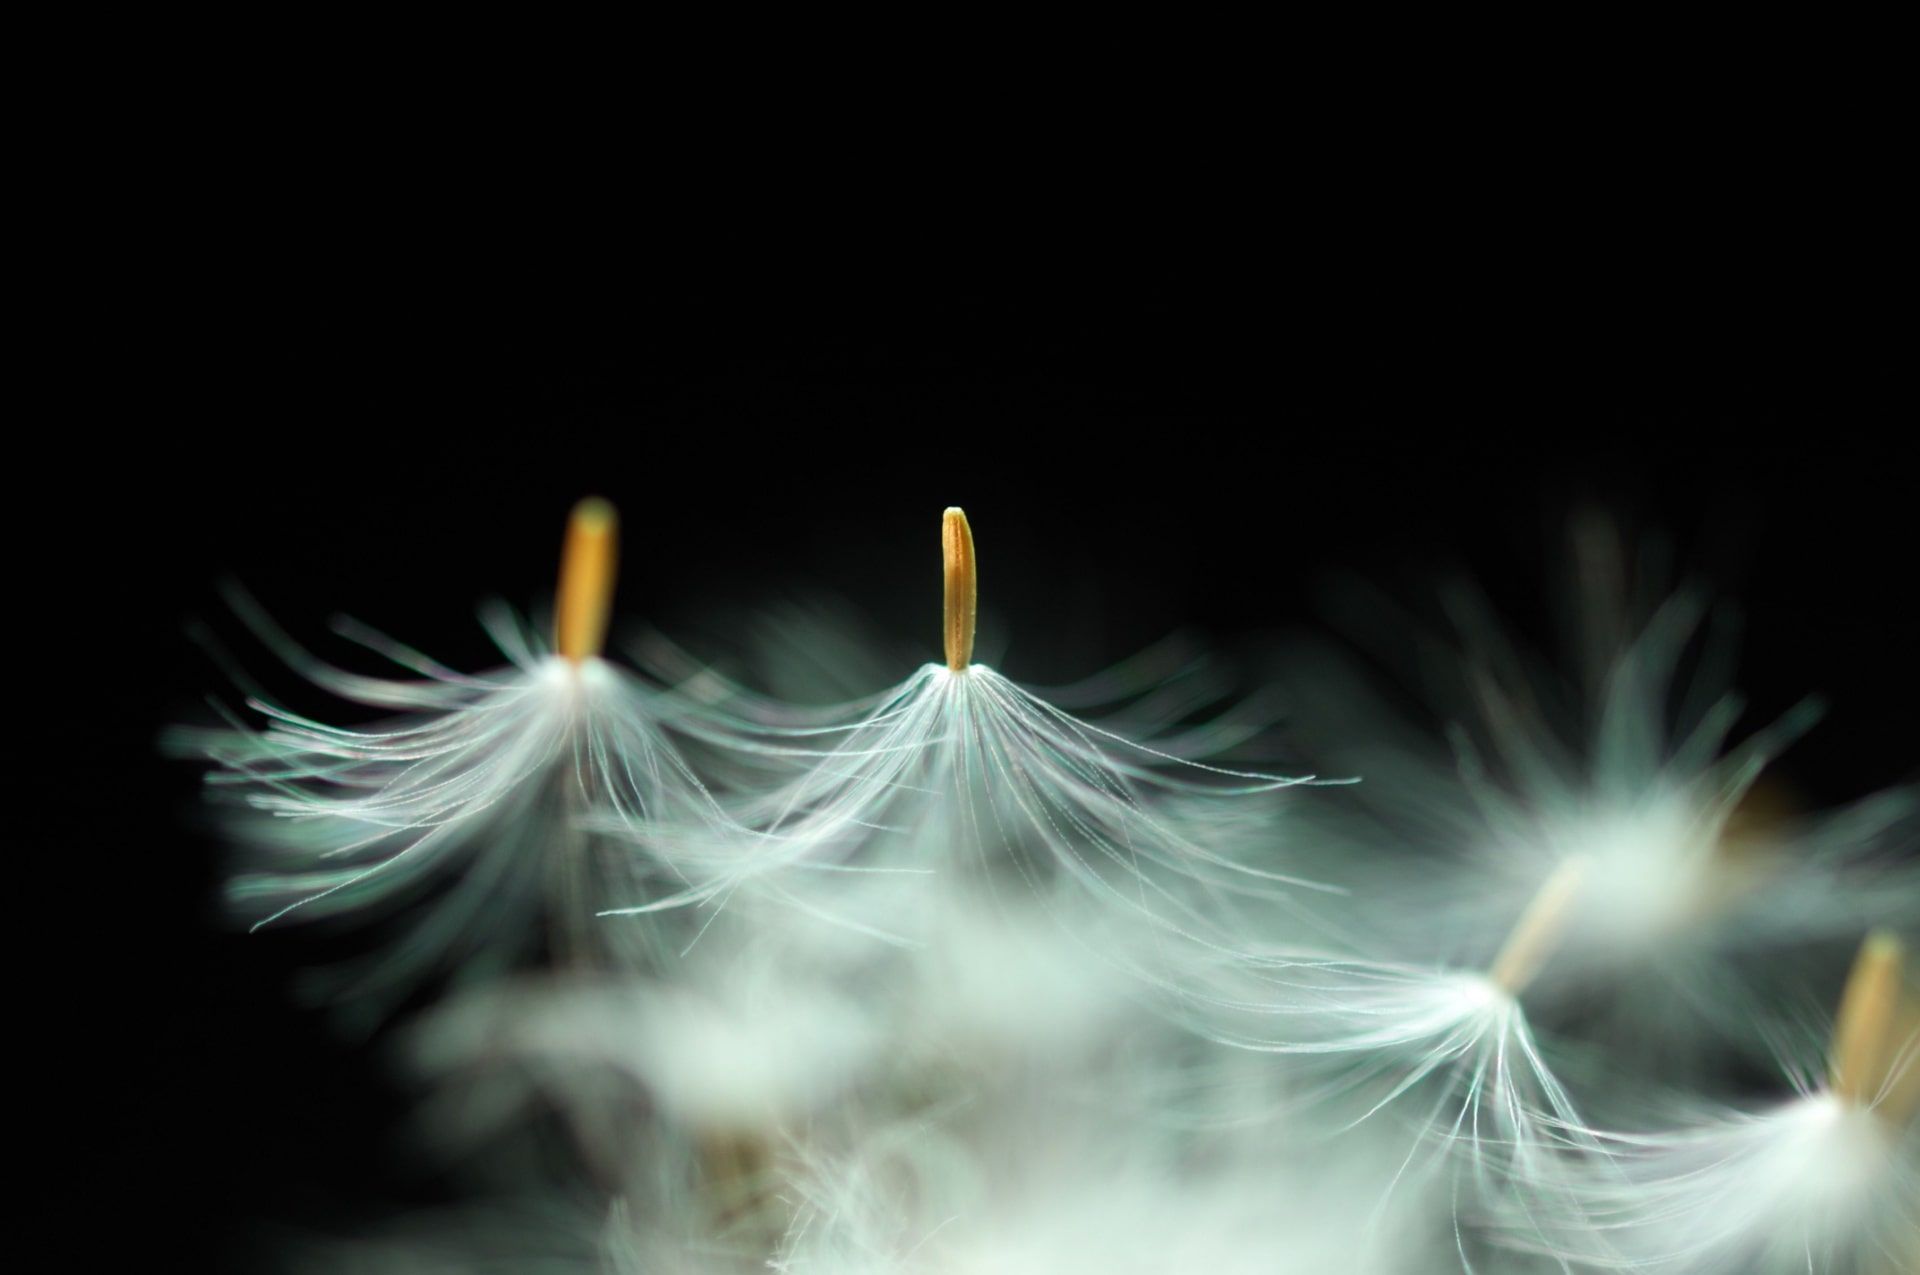 Some dandelion seeds fly away